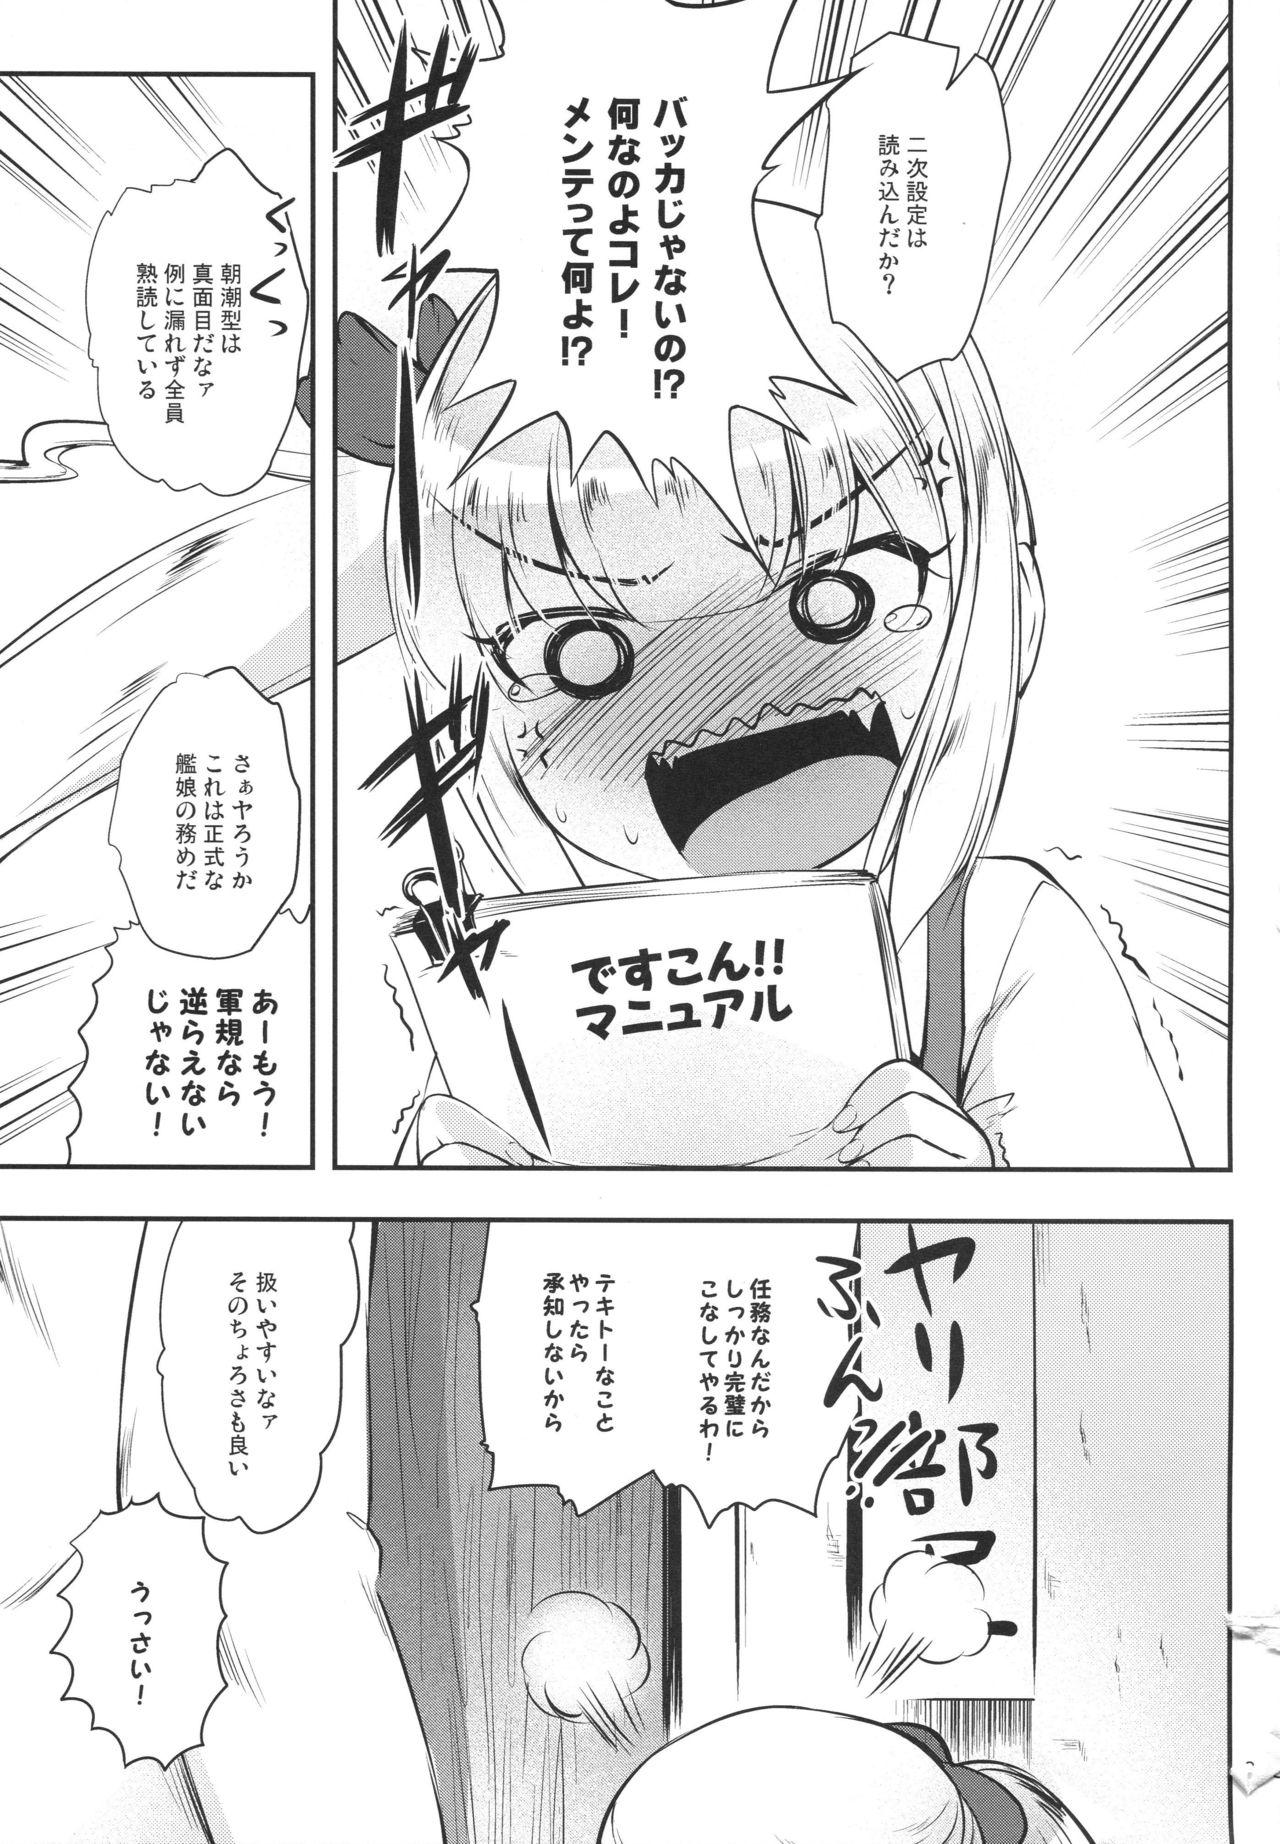 Monstercock DesCon!! 19 - Kantai collection Pussy To Mouth - Page 2